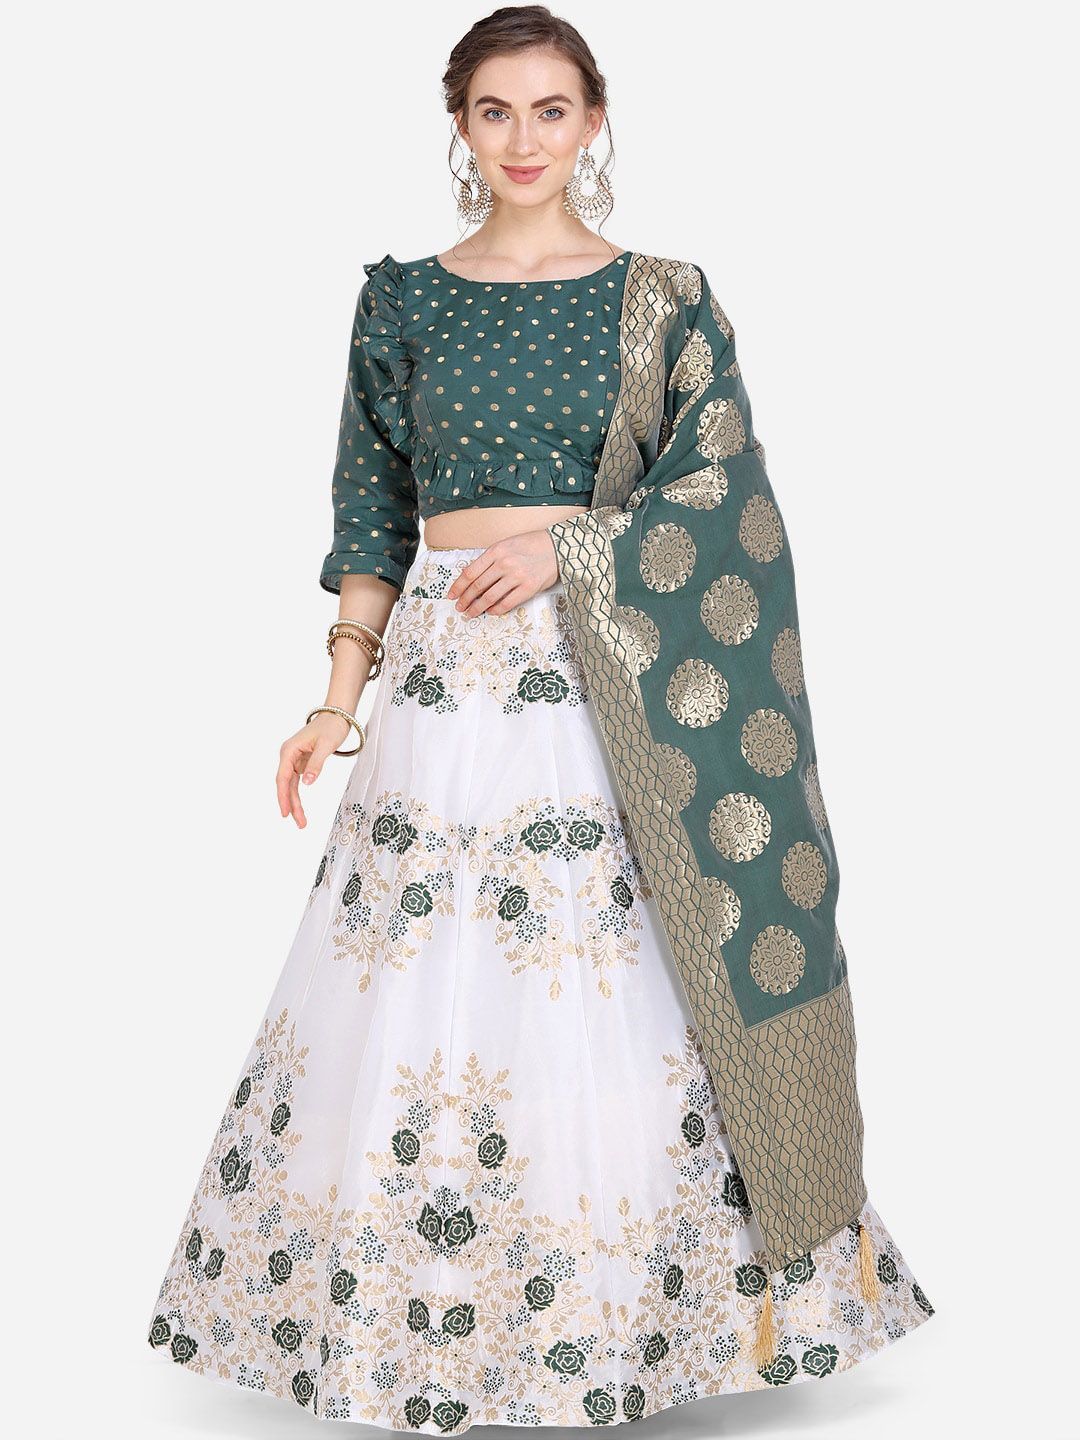 PURVAJA White & Green Printed Semi-Stitched Lehenga & Unstitched Blouse with Dupatta Price in India